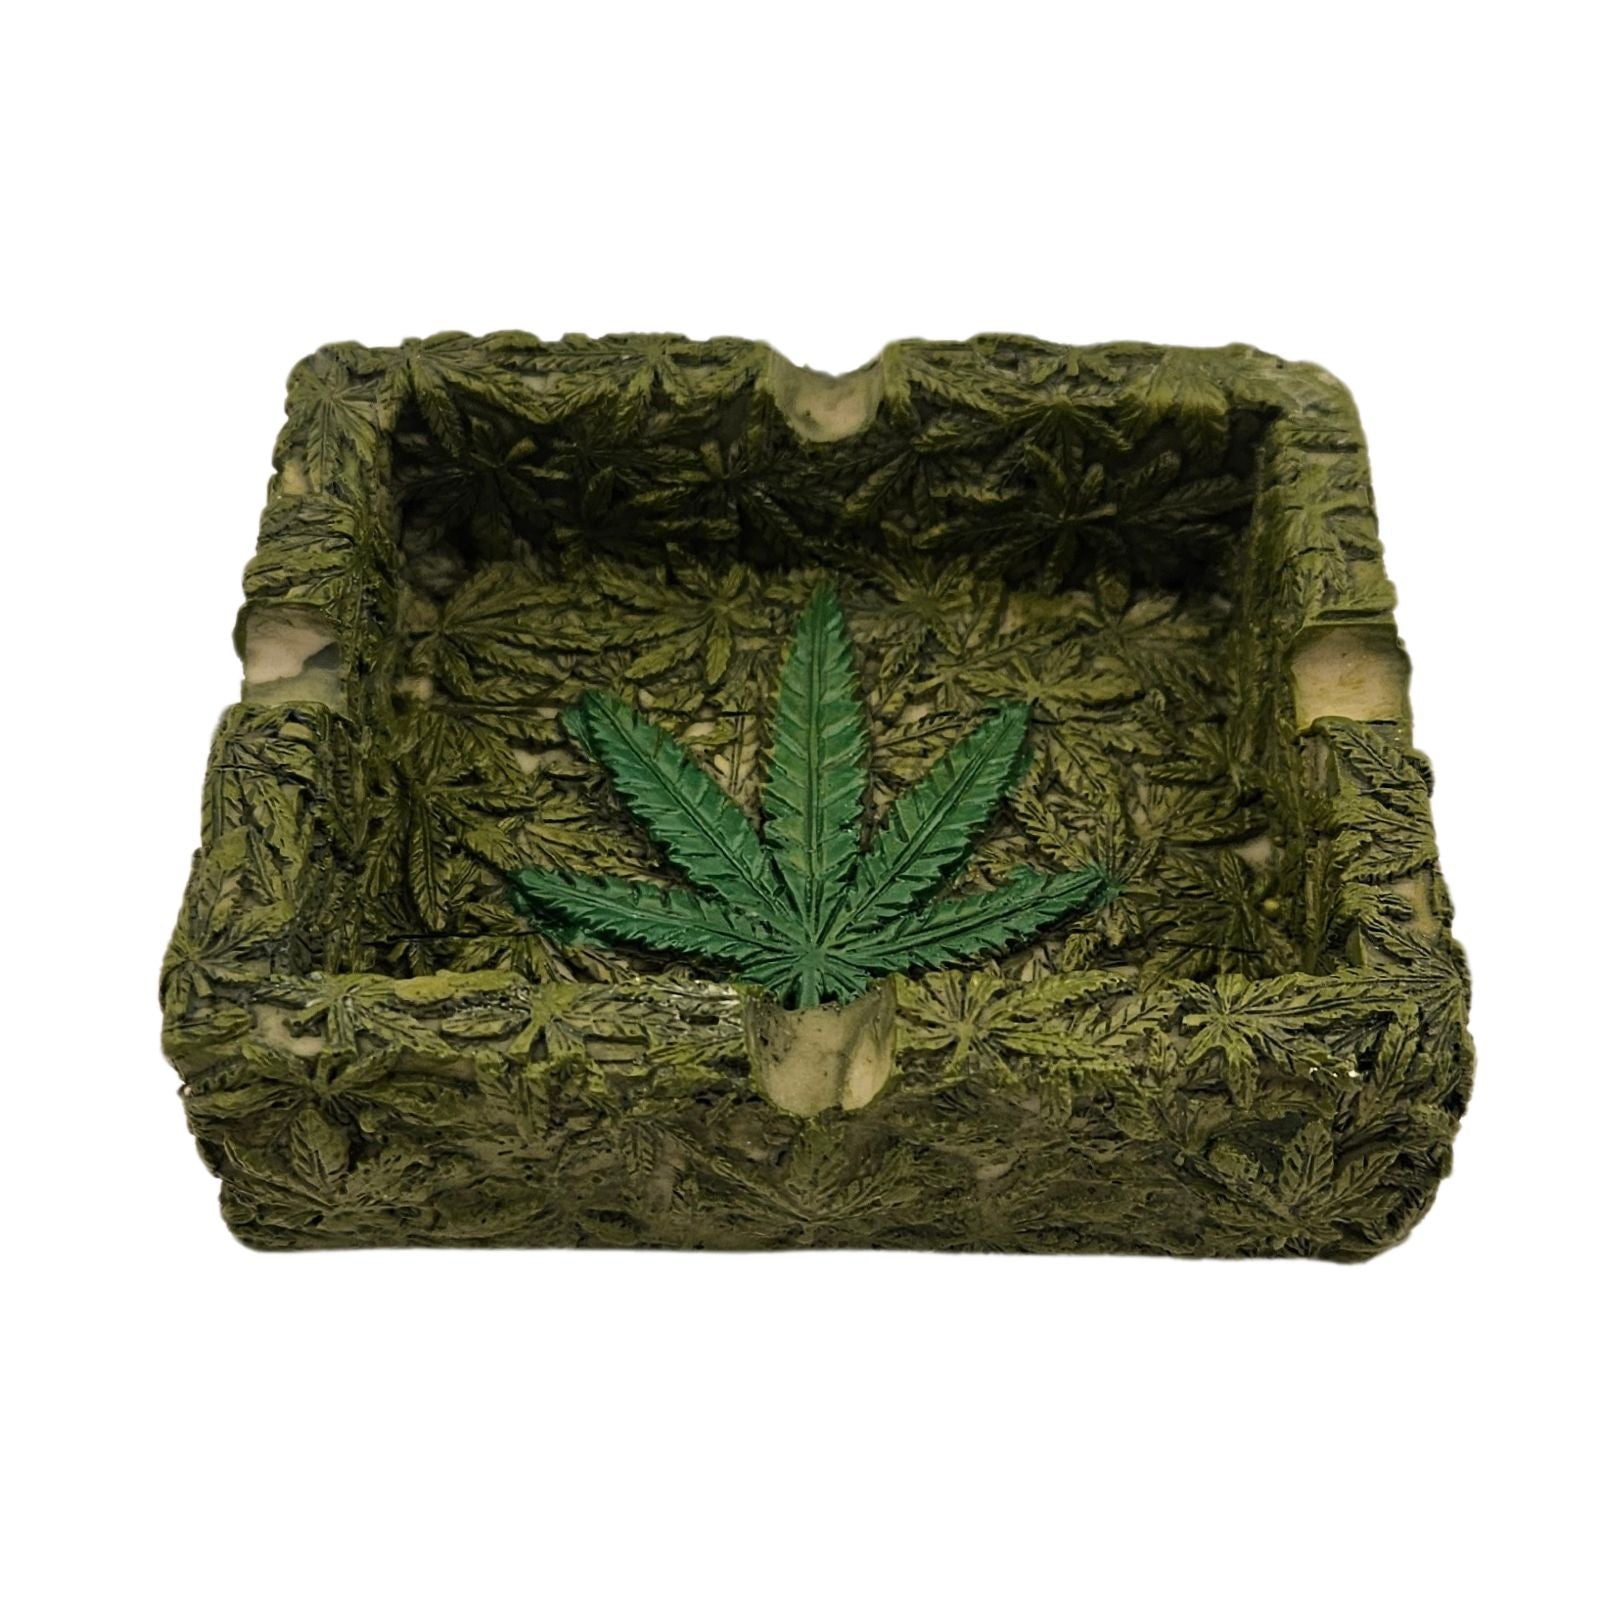 Square green ashtray with weed leaf design